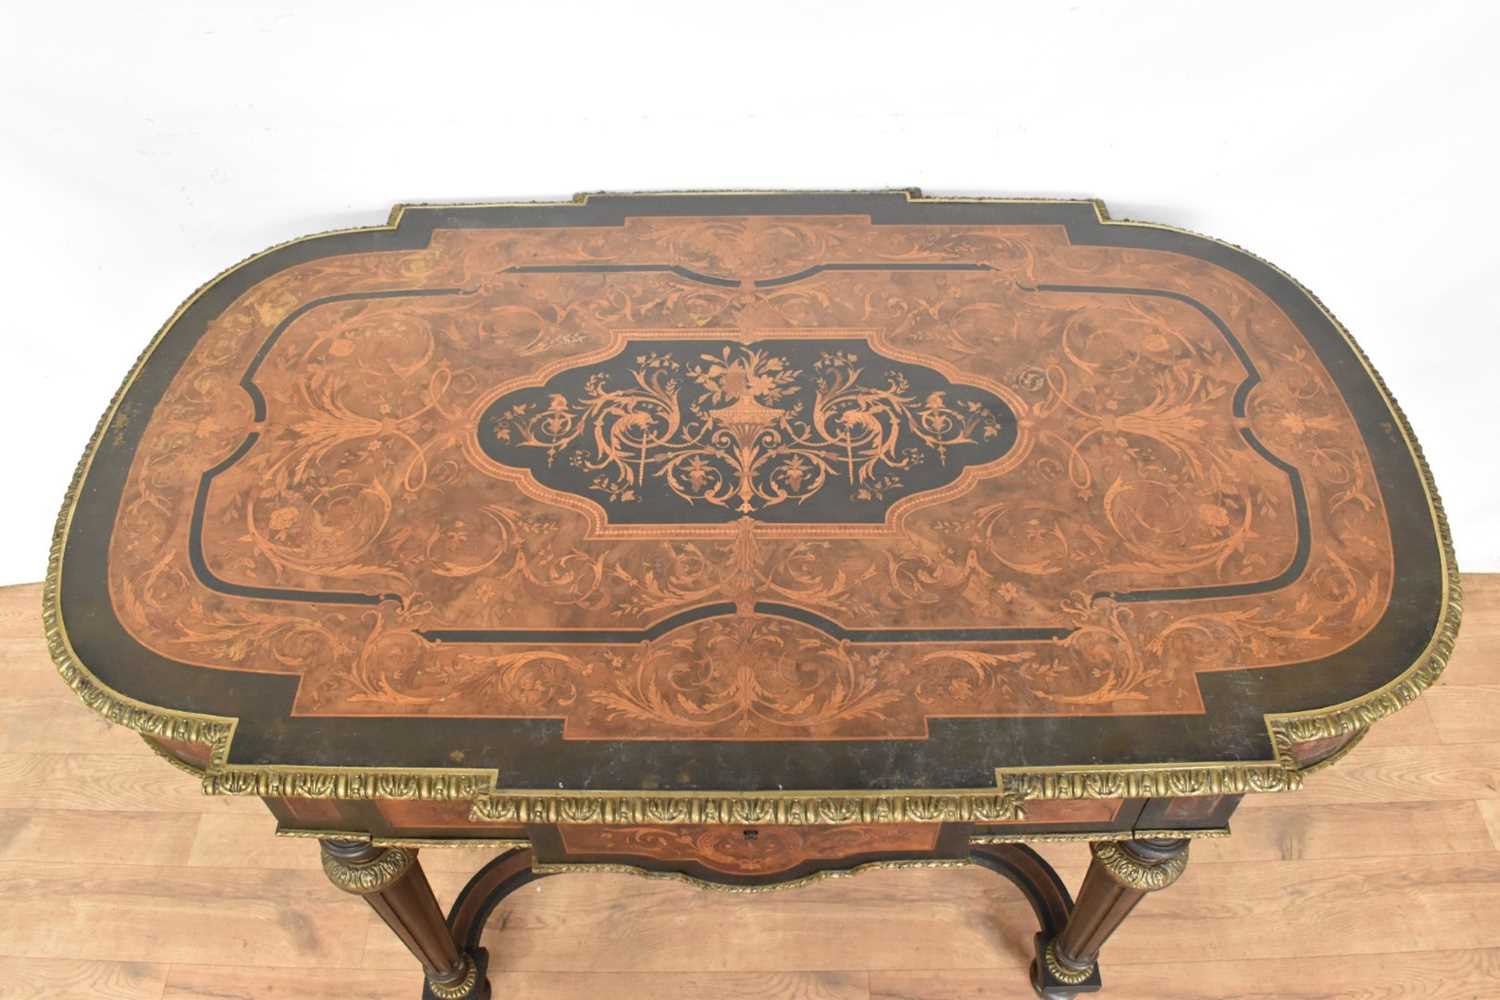 Good 19th century marquetry and ormolu mounted table - Image 2 of 17